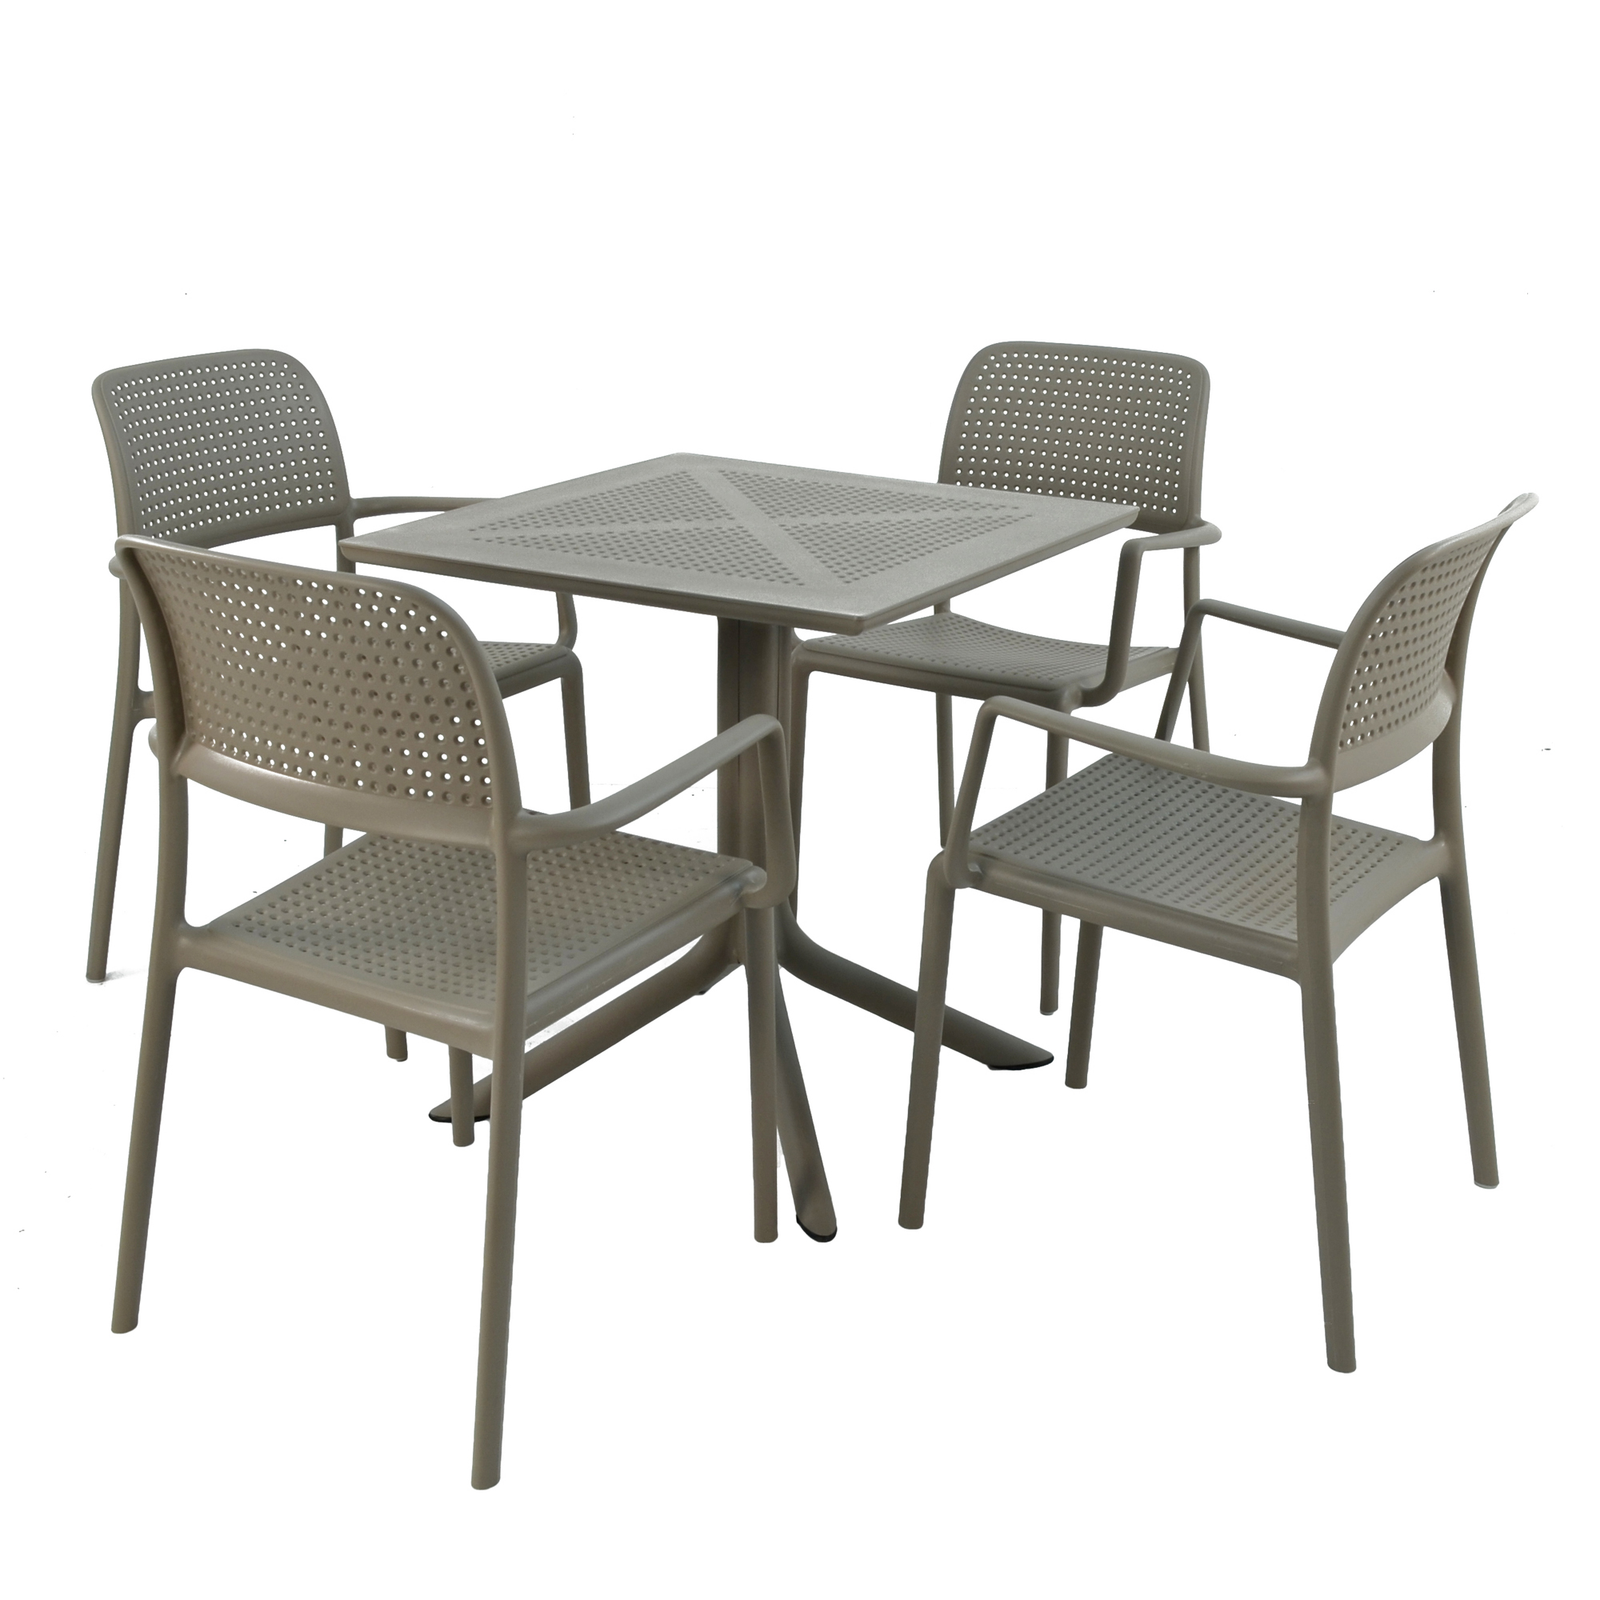 Nardi Clip Garden Table with 4 Bora Chair Set in Turtle Dove Grey Dining Sets Nardi Default Title  